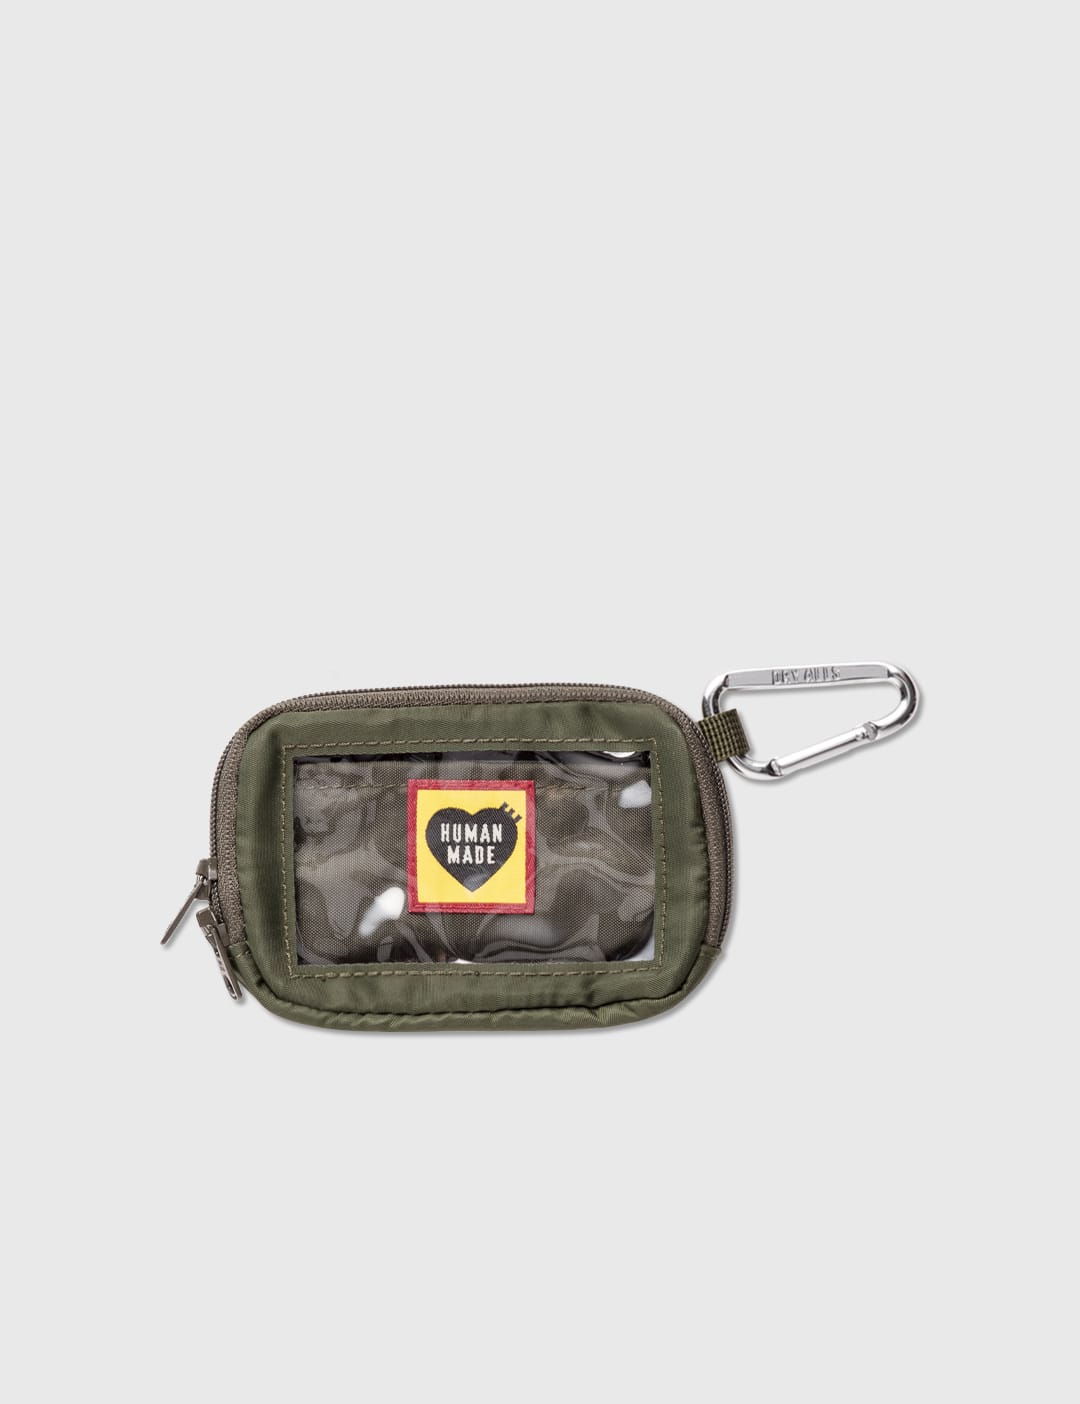 Human Made - Military Card Case | HBX - Globally Curated Fashion